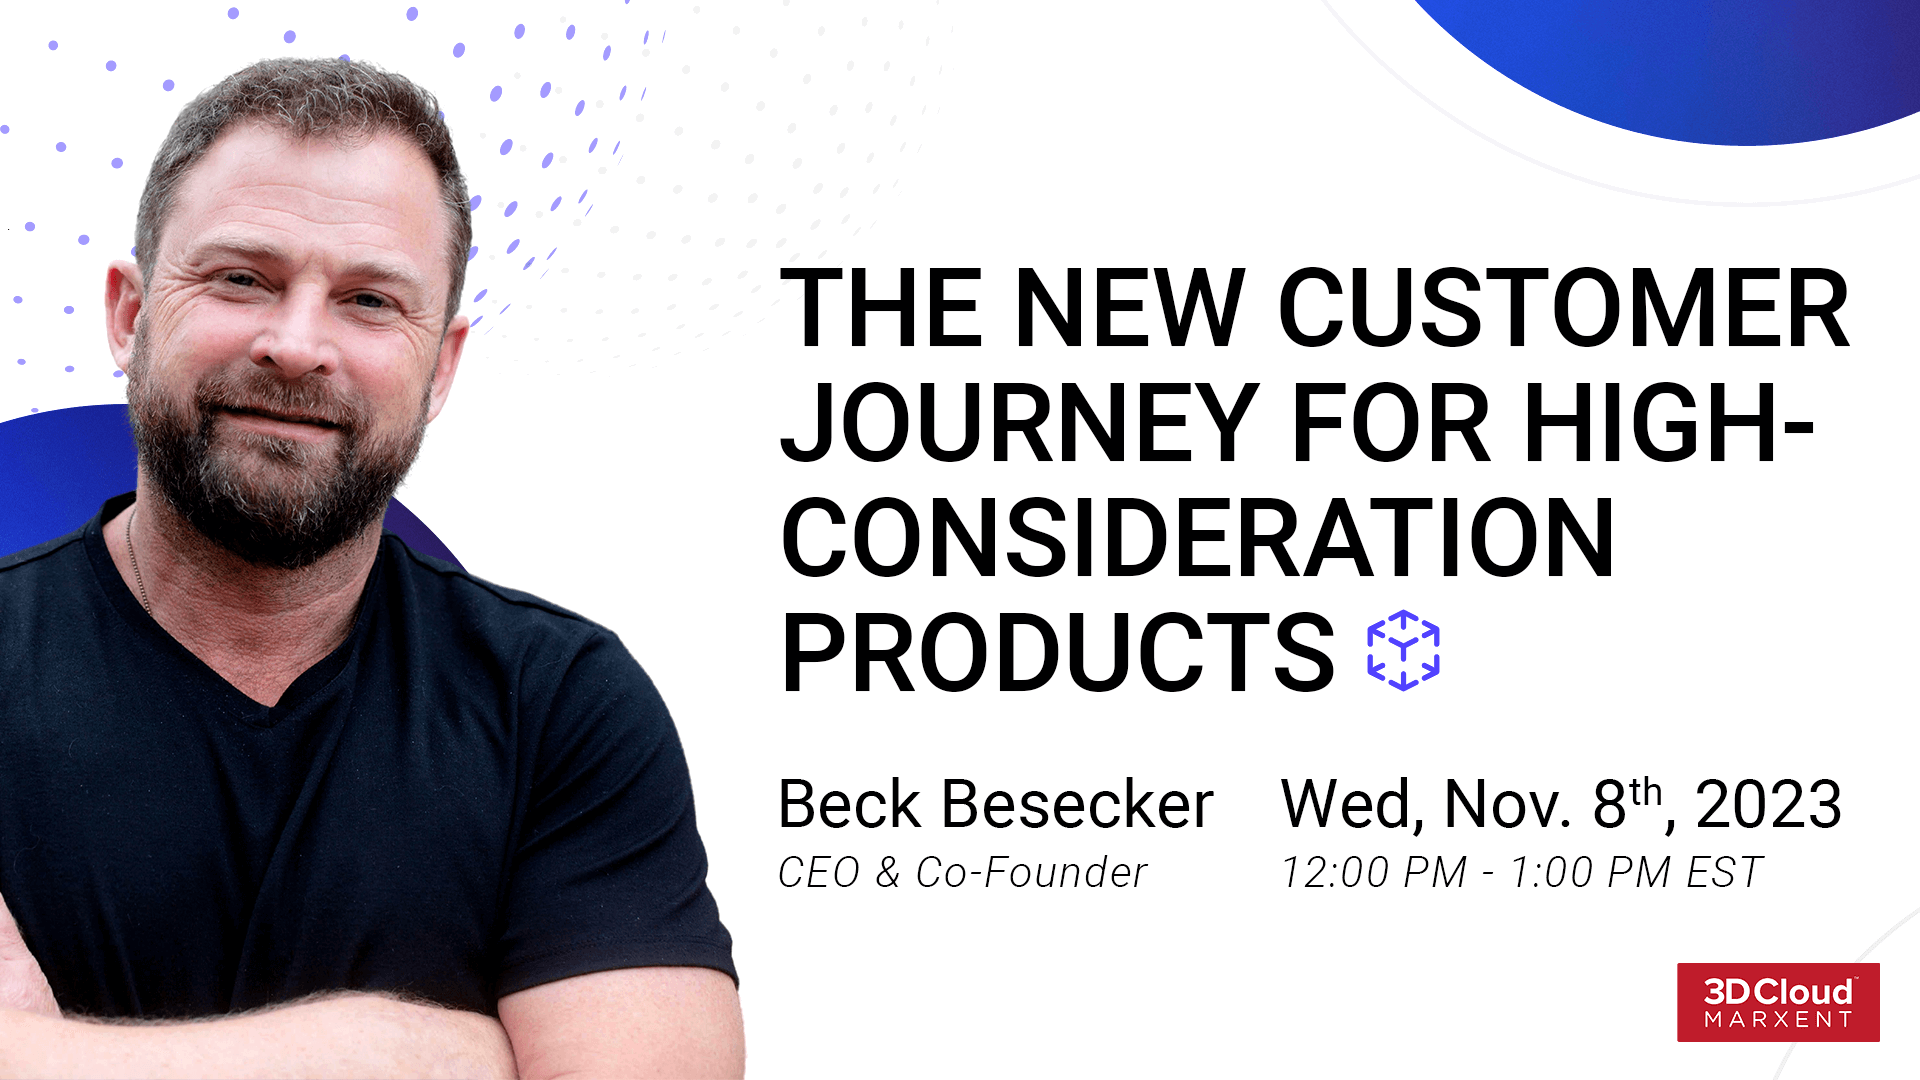 Upcoming Webinar: The New Customer Journey For High-Consideration Products